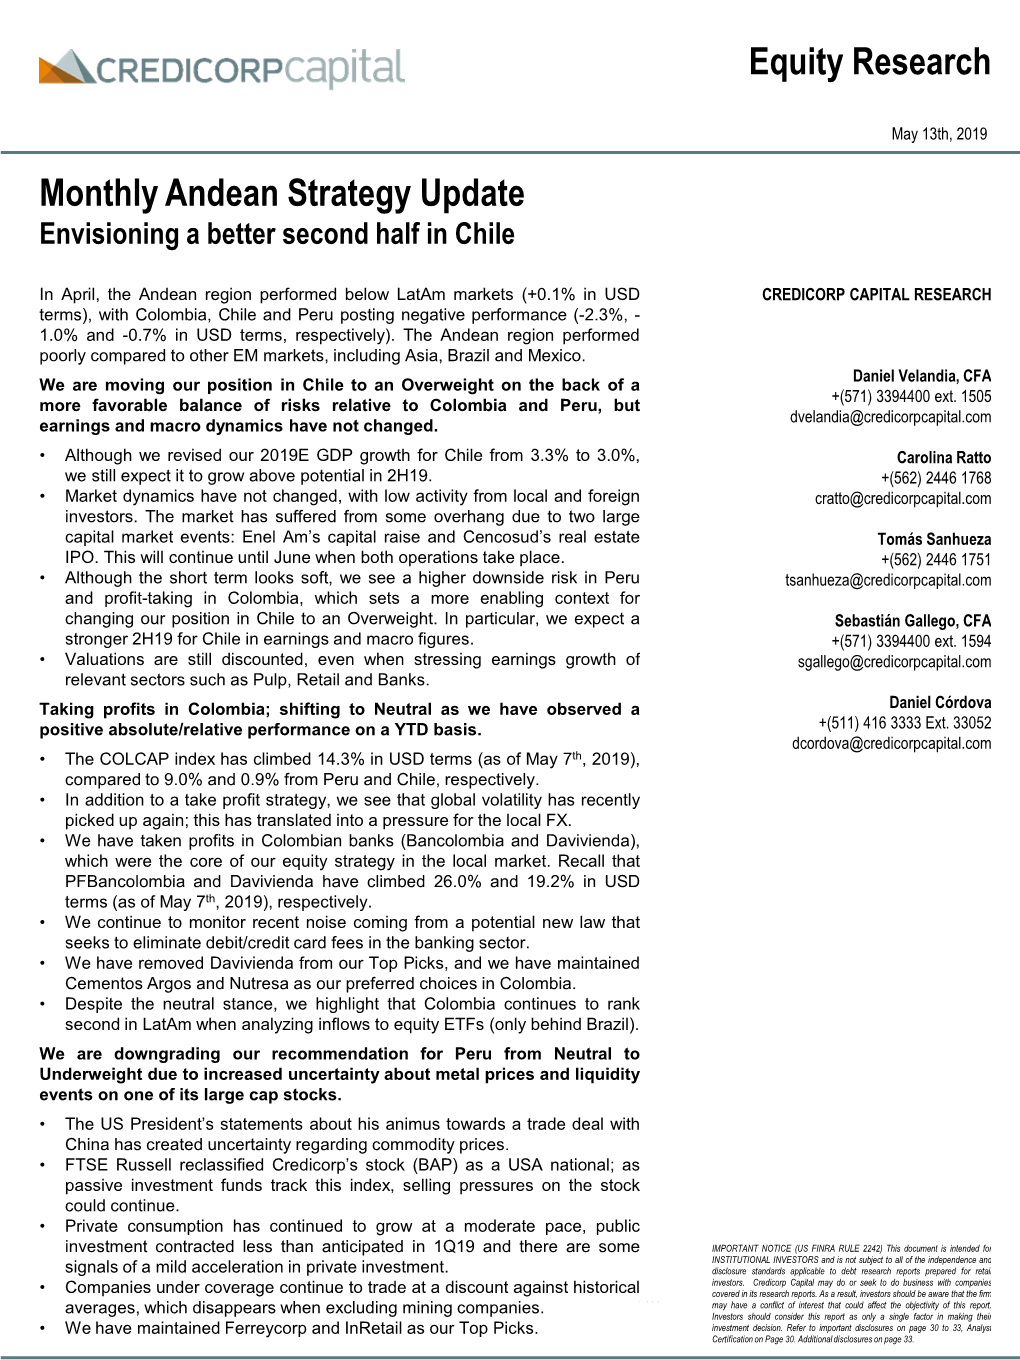 Monthly Andean Strategy Update Envisioning a Better Second Half in Chile